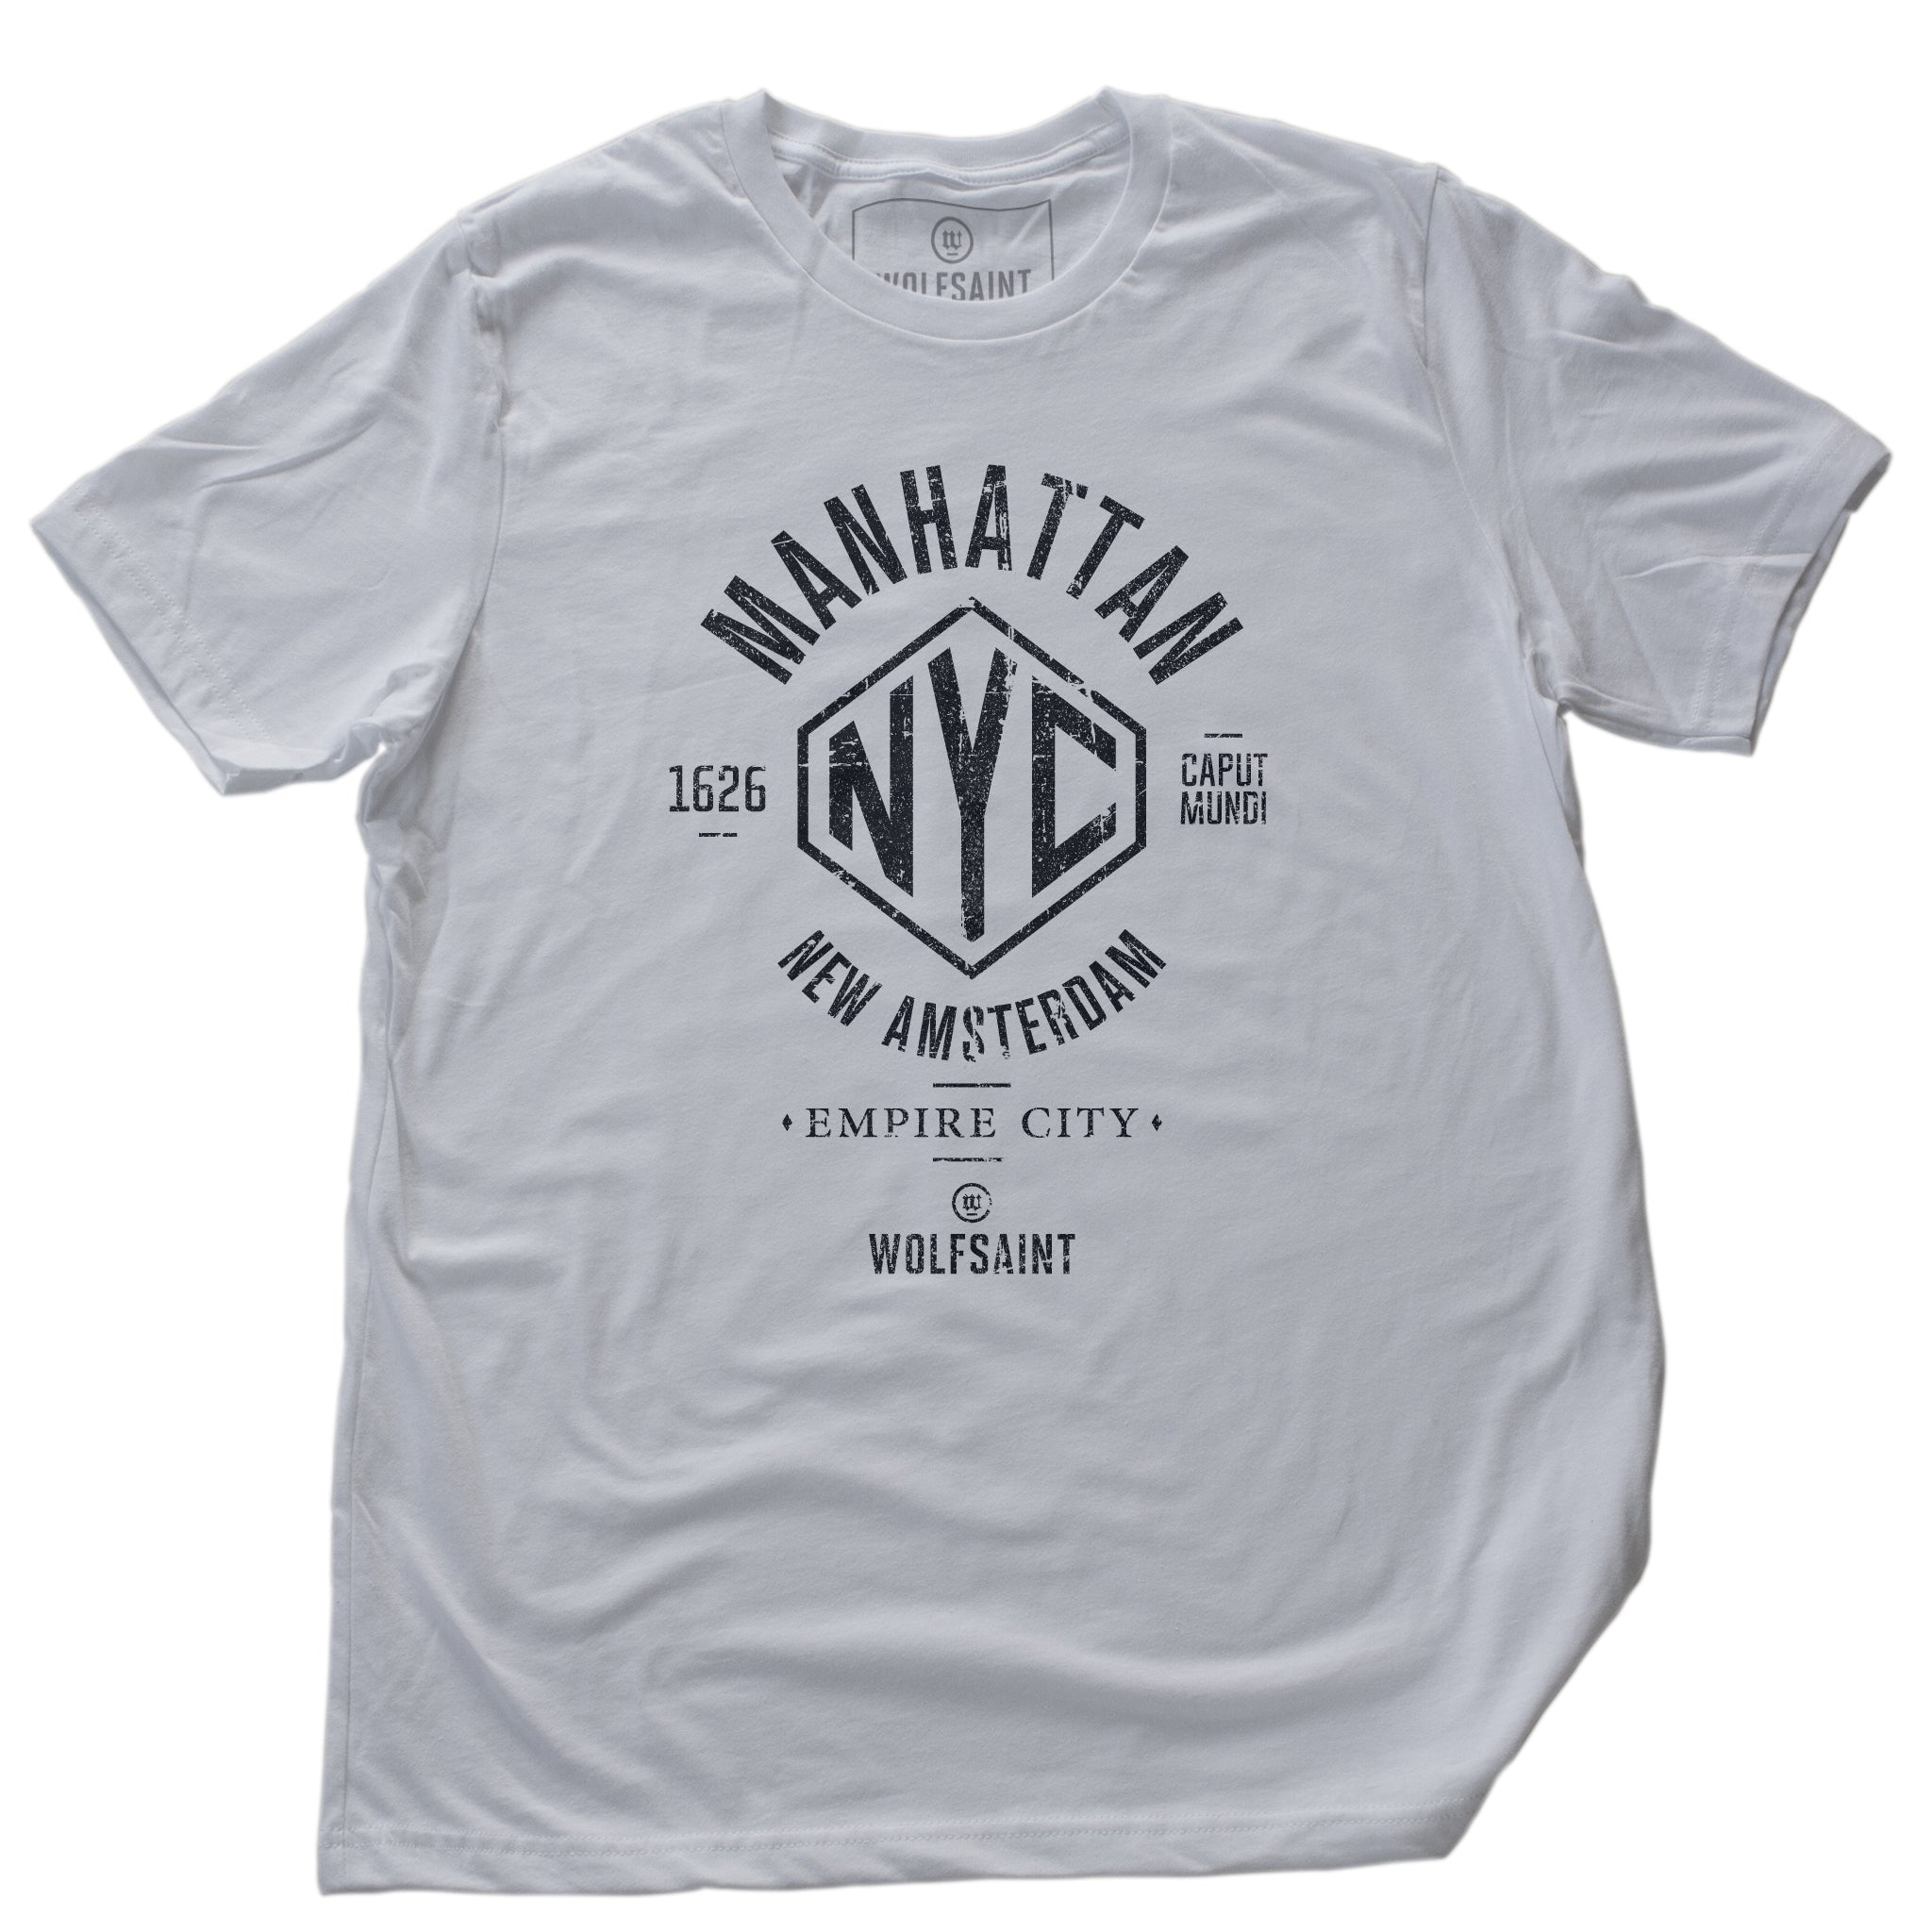 A vintage-inspired retro designed fashion-shirt in White, featuring an “NYC” graphic surrounded by the words “Manhattan” and “New Amsterdam / Empire City” and the year of its founding, 1626, along with the Latin words Caput Mundi, meaning Capital of the World. From wolfsaint.net